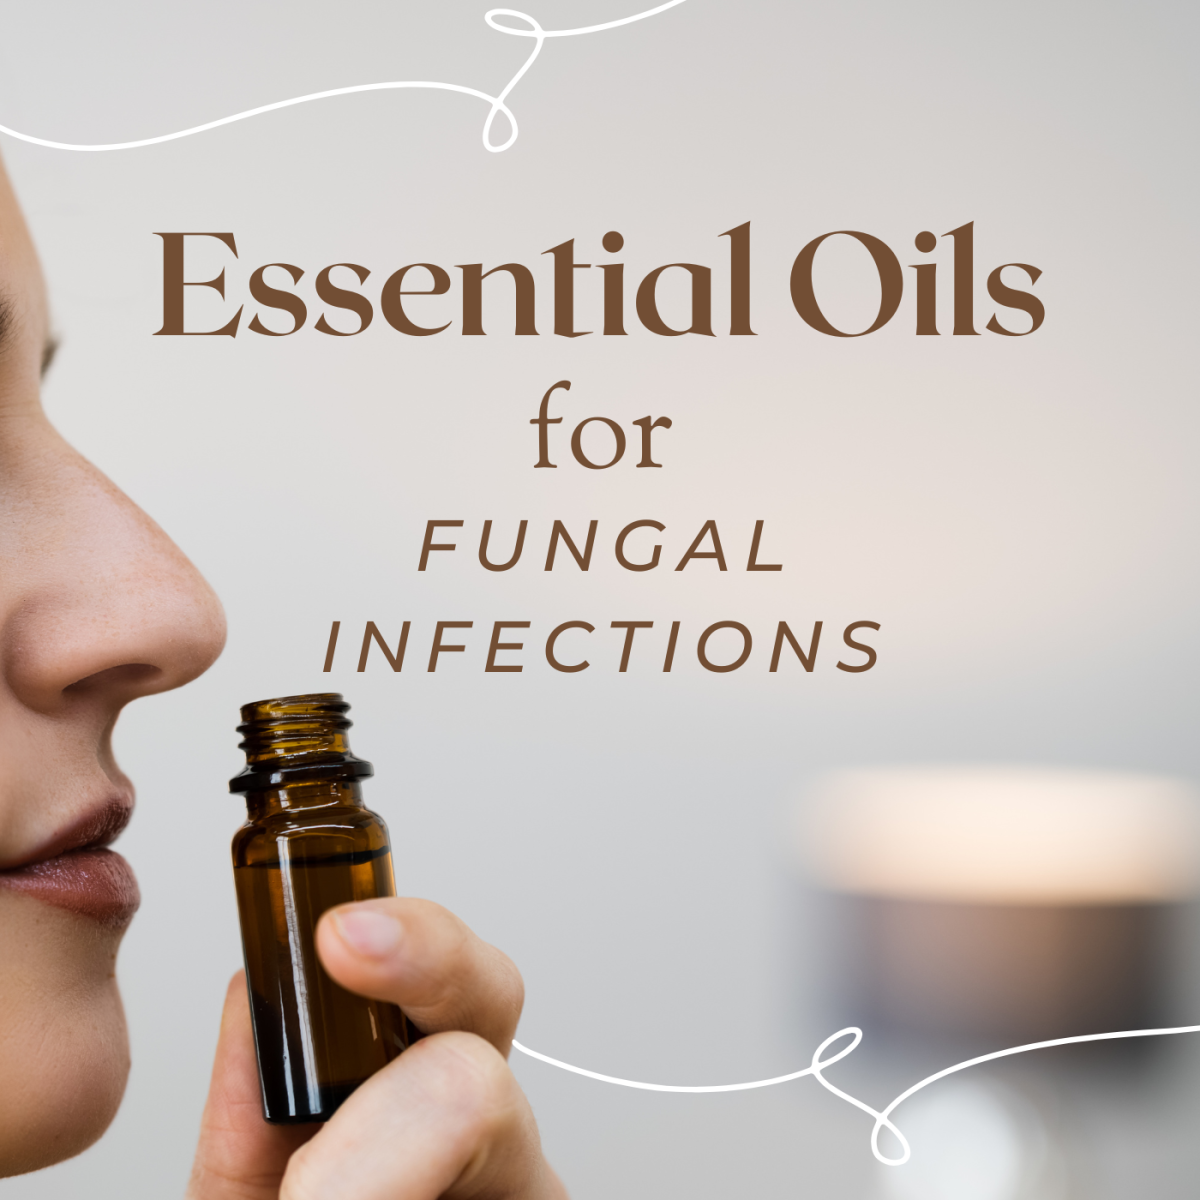 Essential oils for fungal infections.